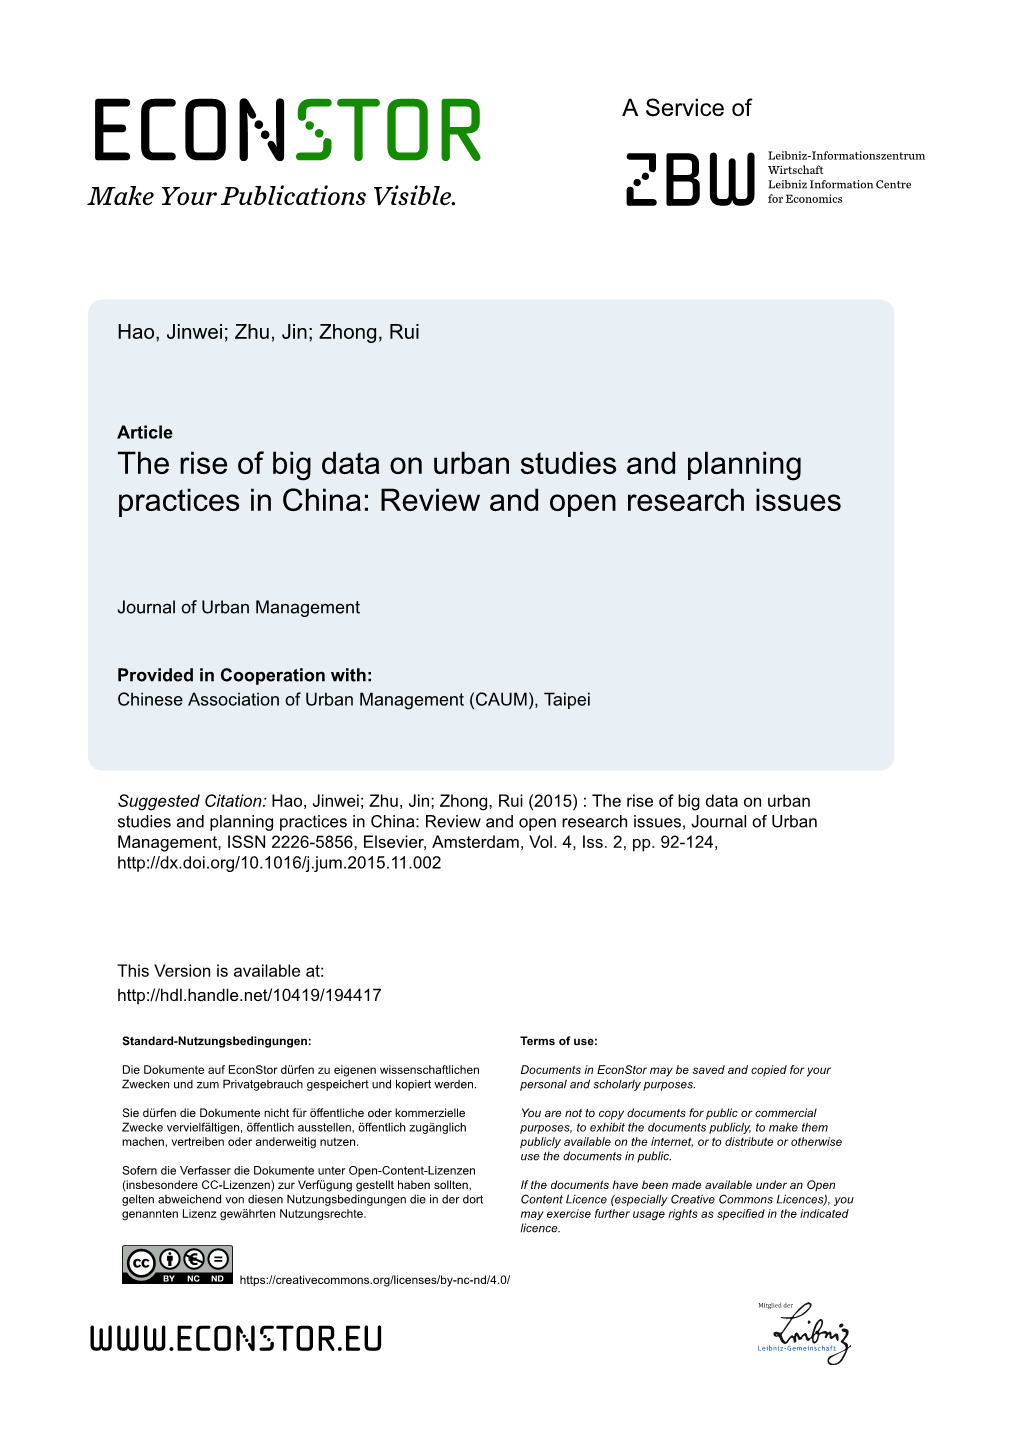 The Rise of Big Data on Urban Studies and Planning Practices in China: Review and Open Research Issues